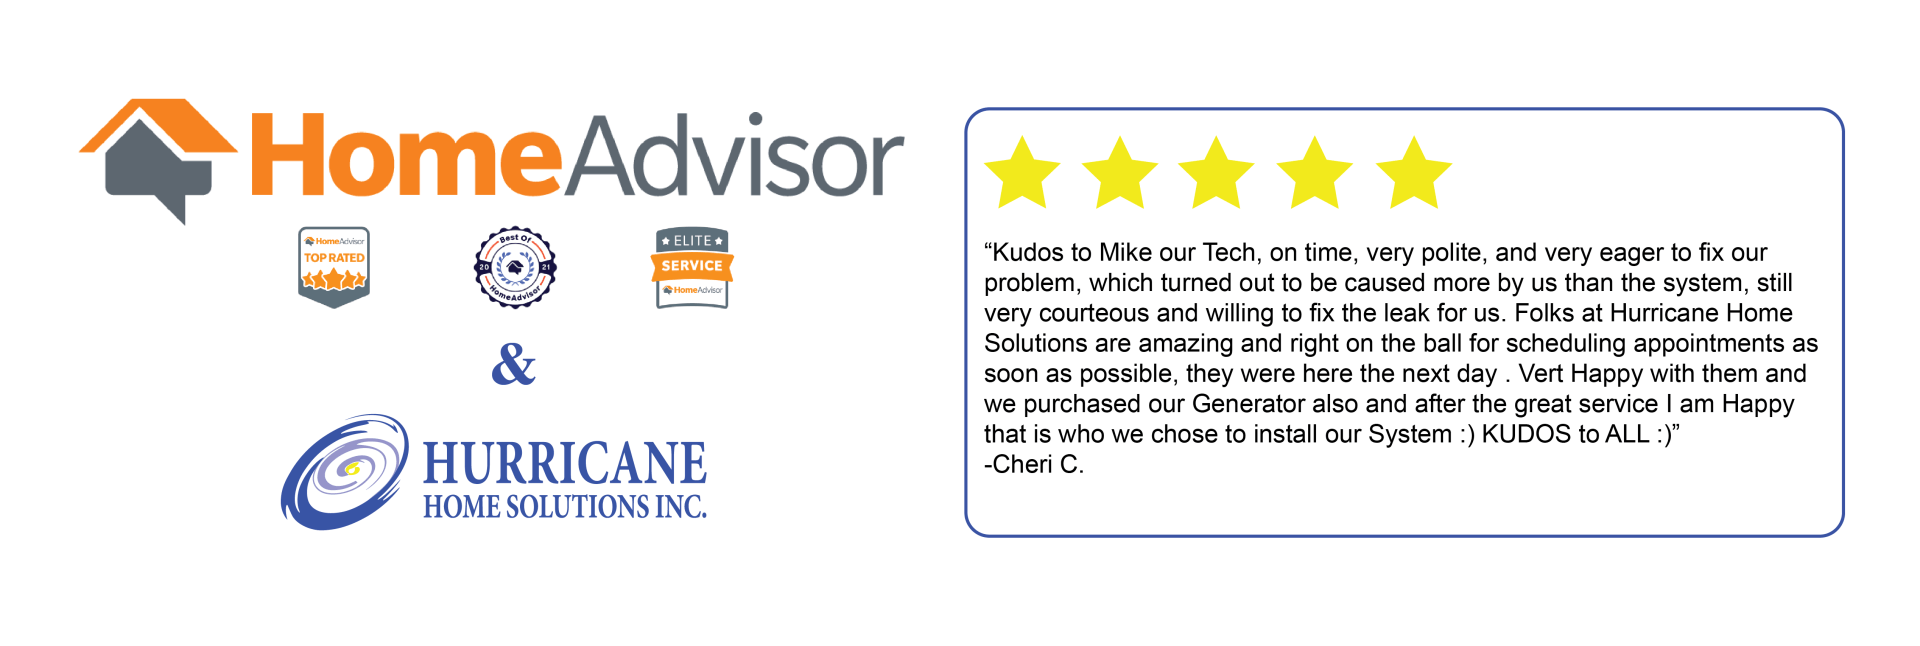 A 5-Star Review on HomeAdvisor for Hurricane Home Solutions